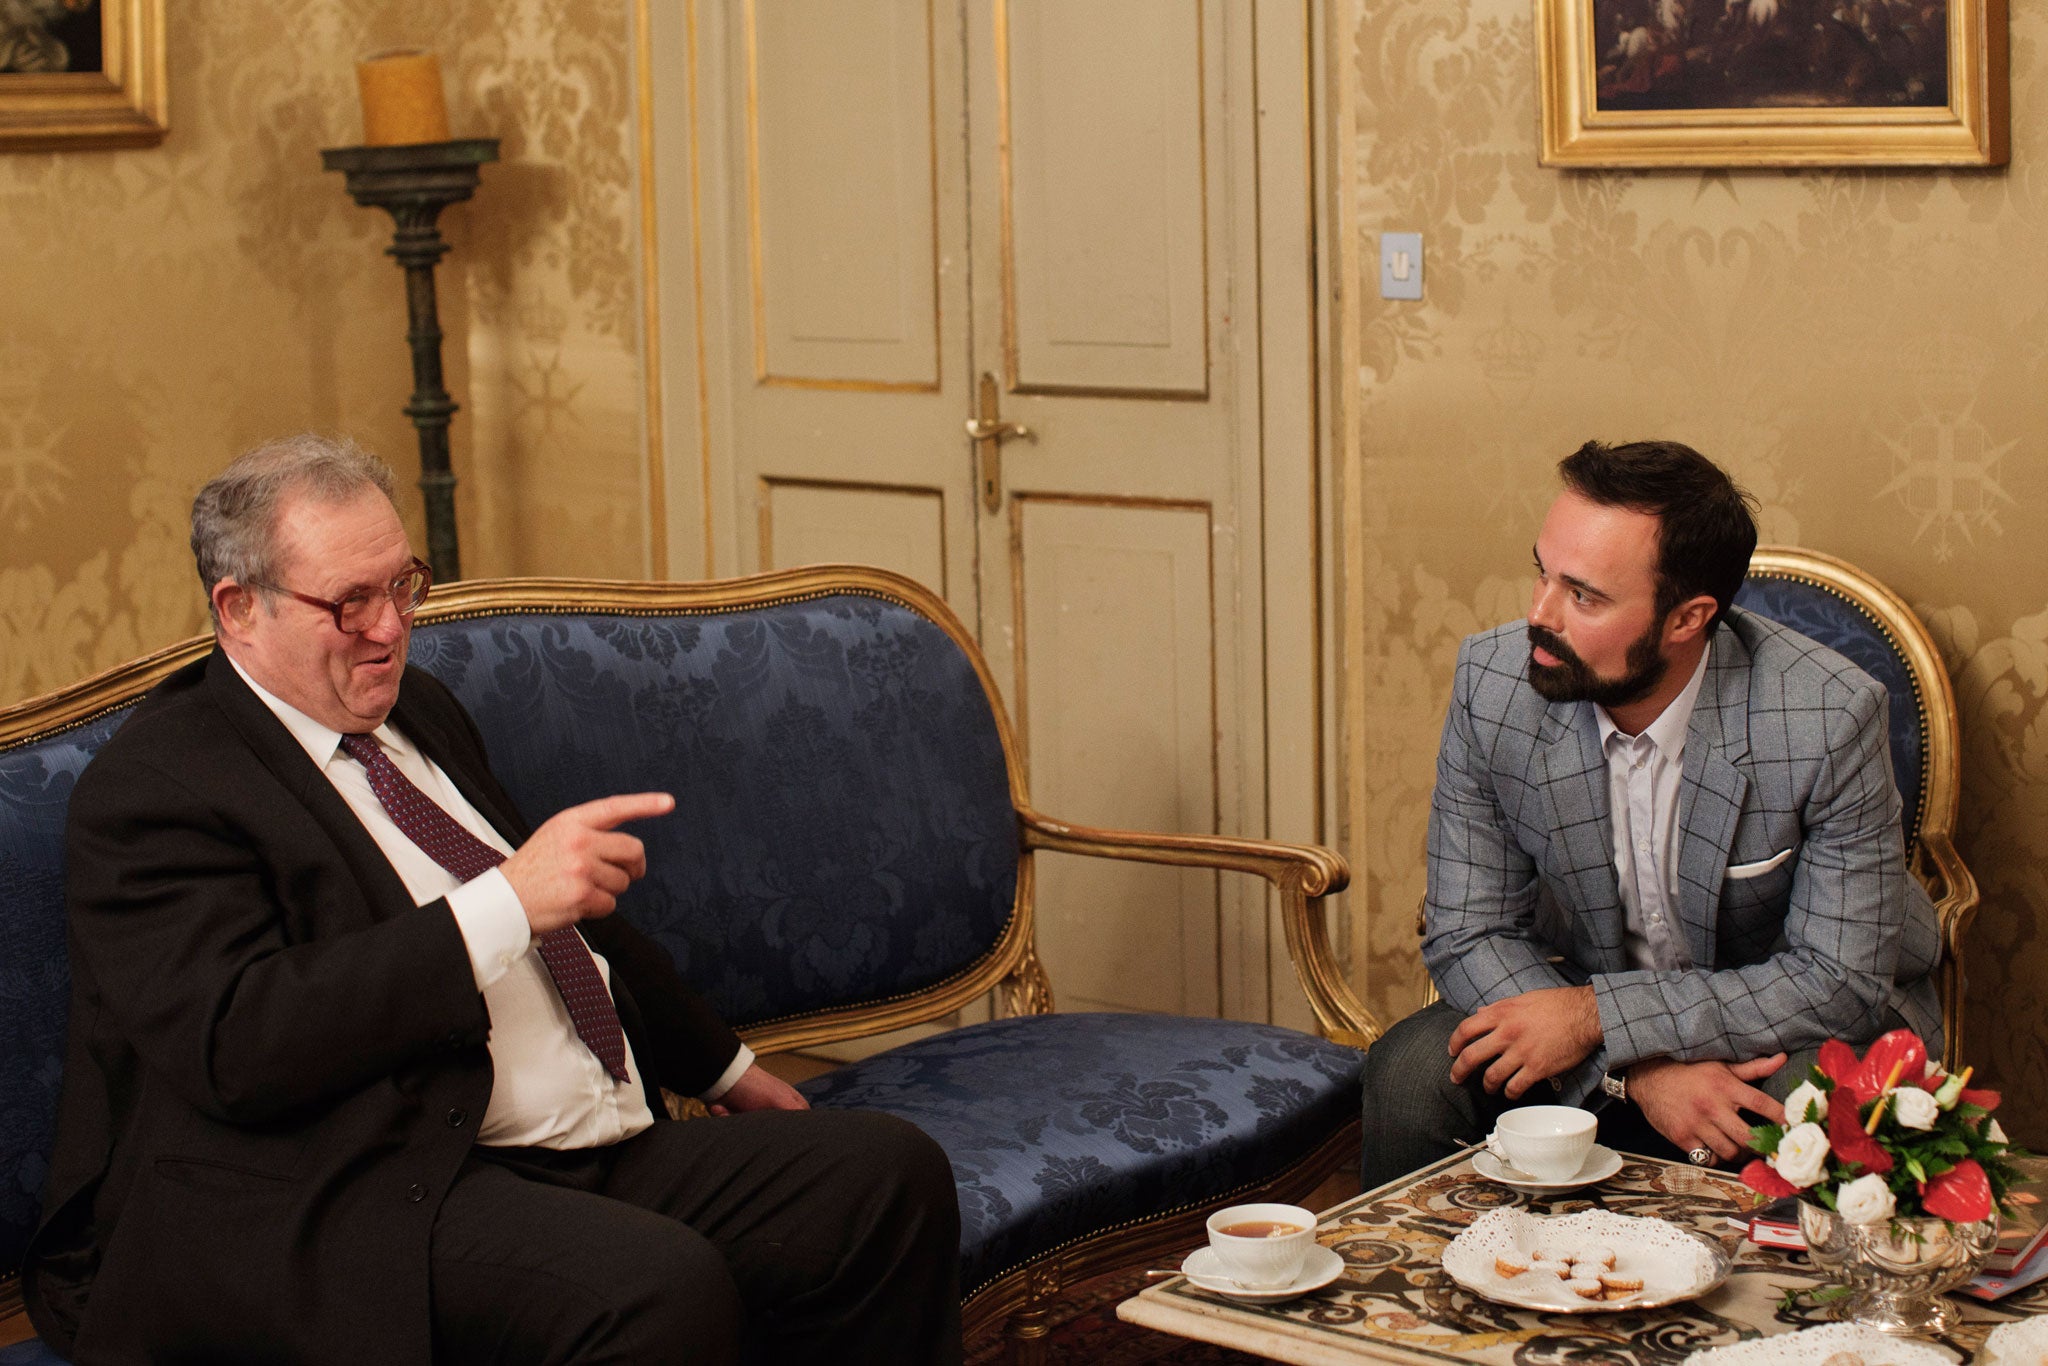 'More Rotary than Hellfire Club': Grand Master Festing and Evgeny Lebedev chat over tea in the Palazzo Malta